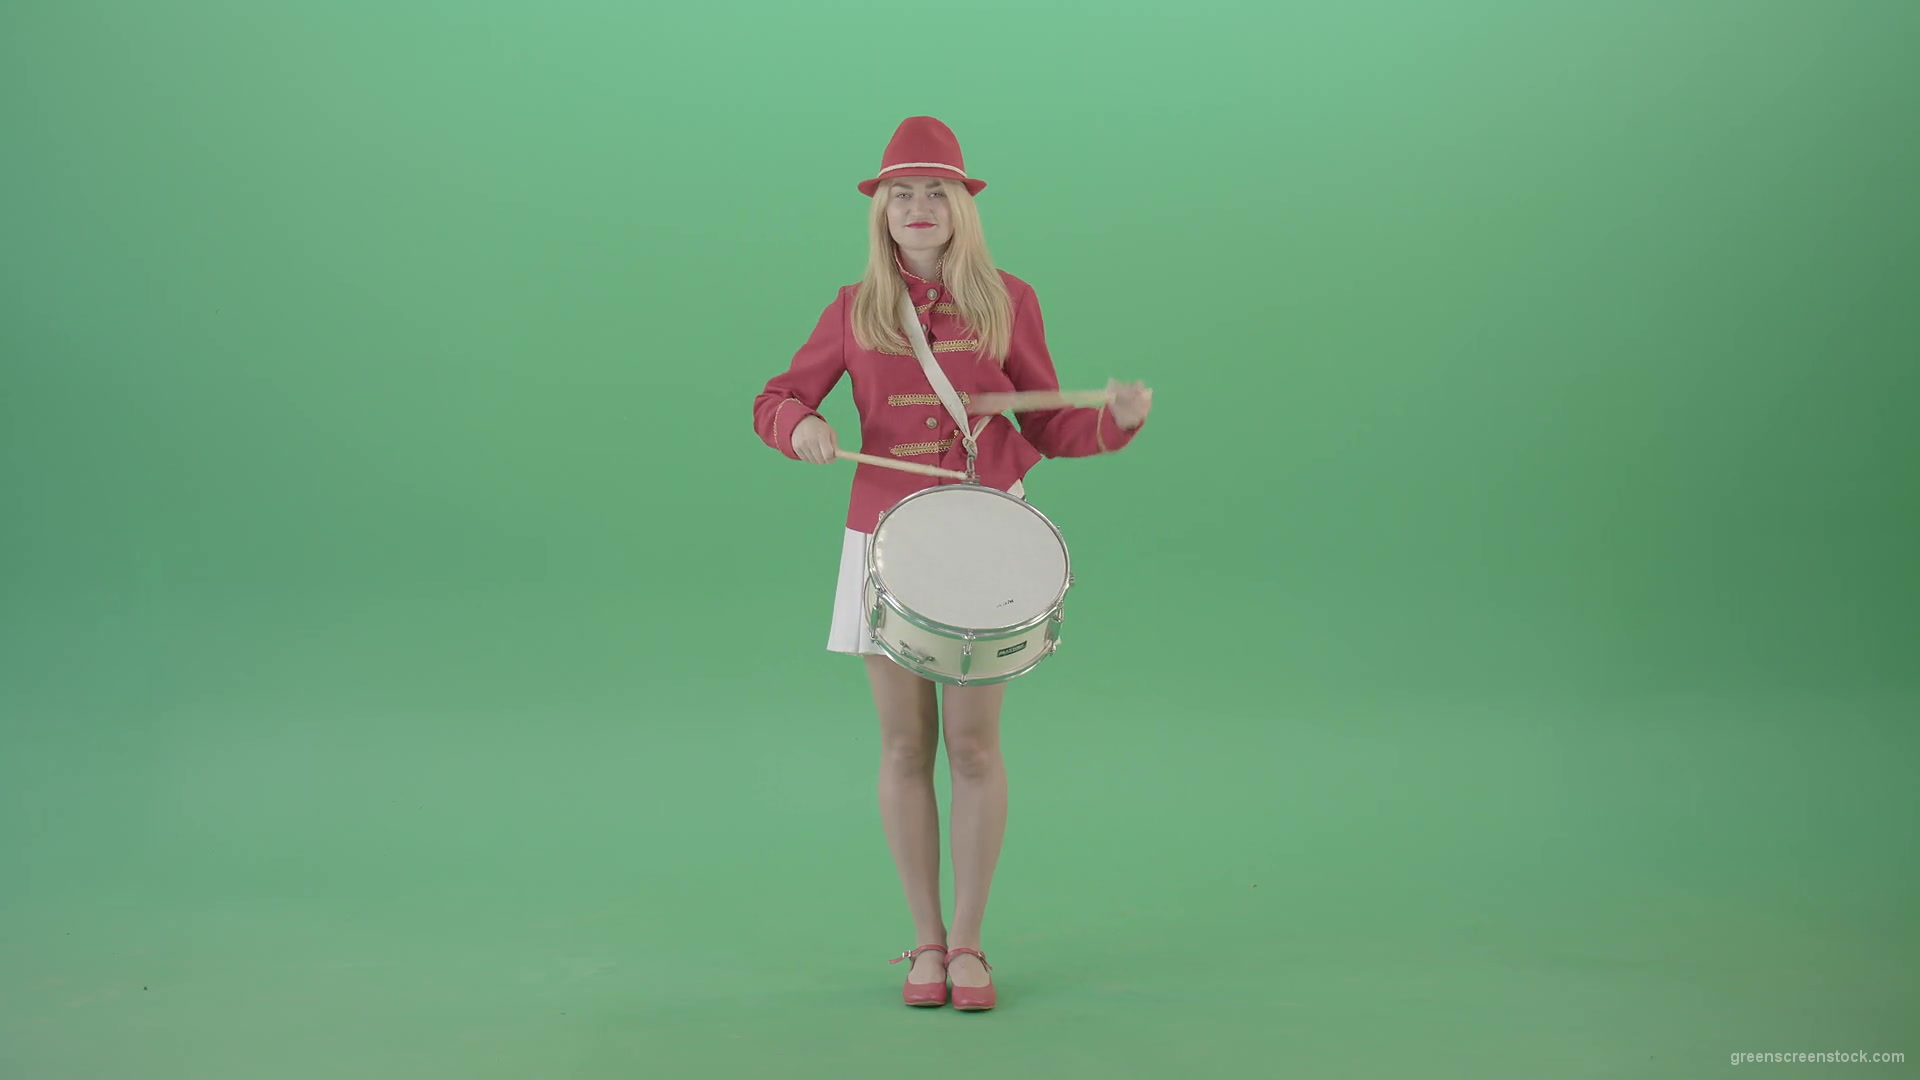 Girl-in-18-Century-military-uniform-play-snare-drum-isolated-on-green-screen-4K-Video-Footage-1920_009 Green Screen Stock